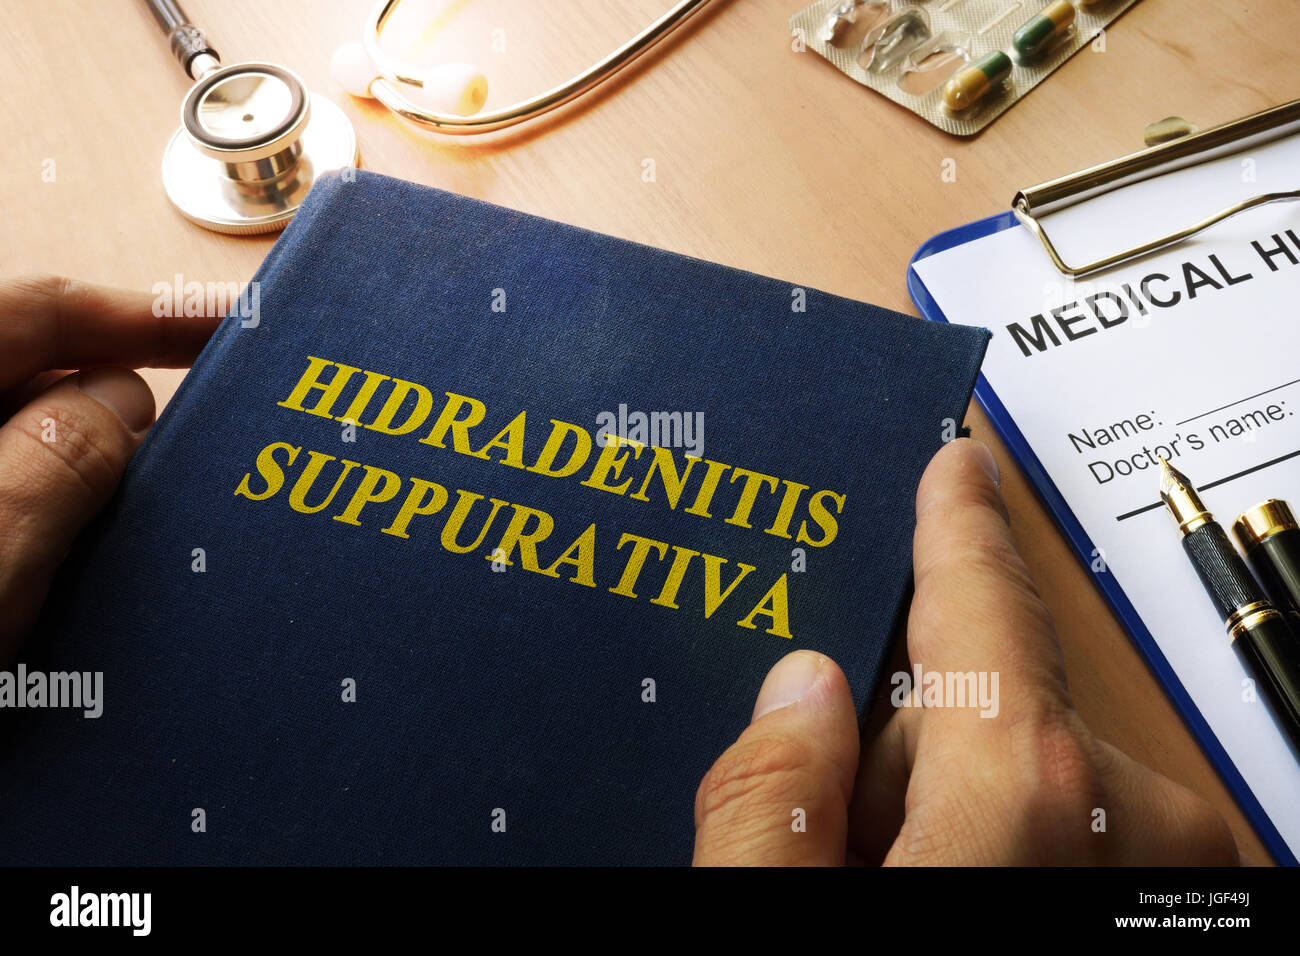 Book with title Hidradenitis Suppurativa on a table. Stock Photo